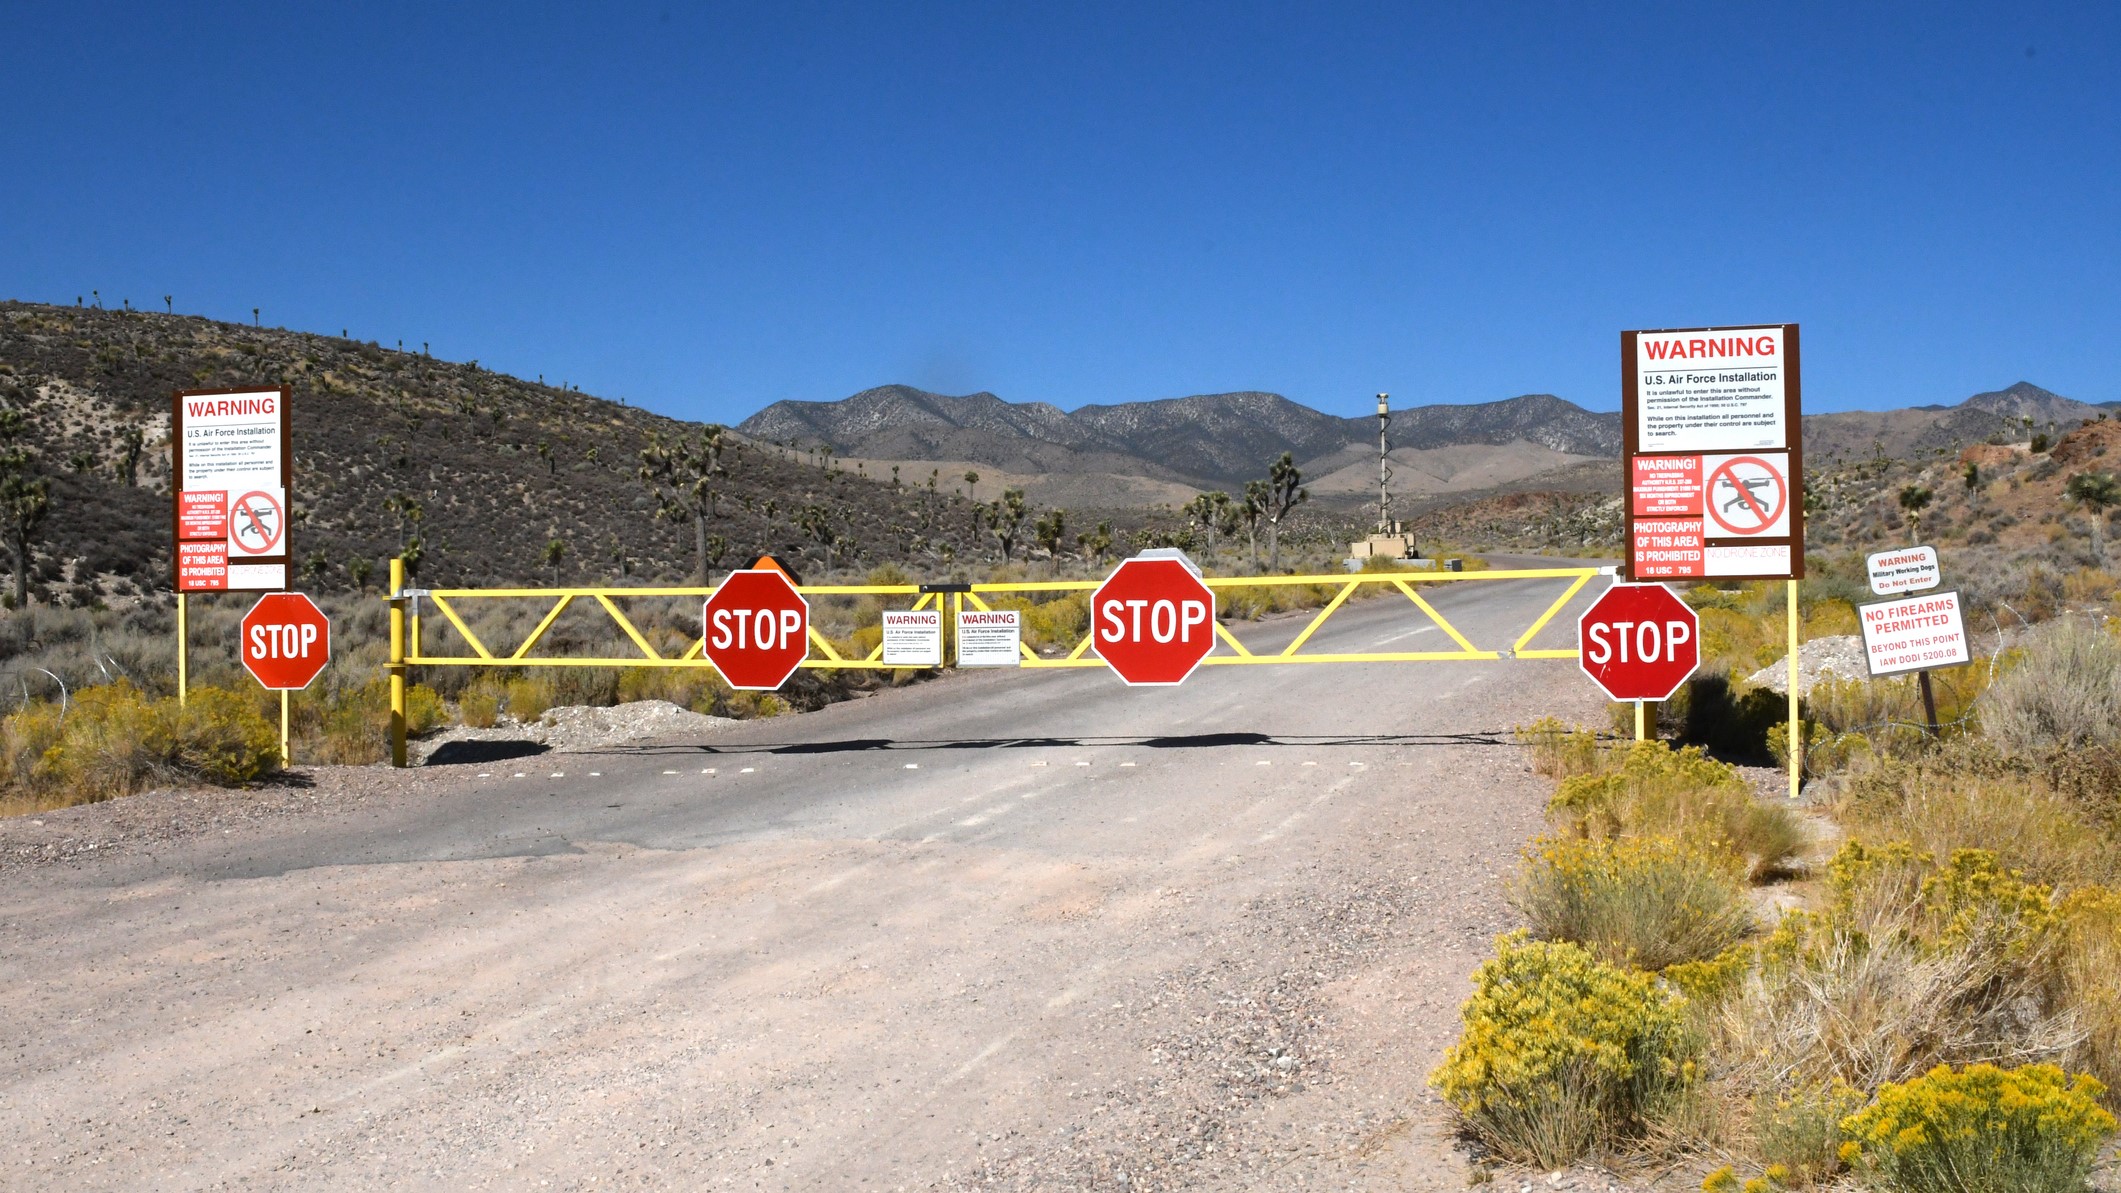 Complete the signs and traffic signs by entering Area 51.